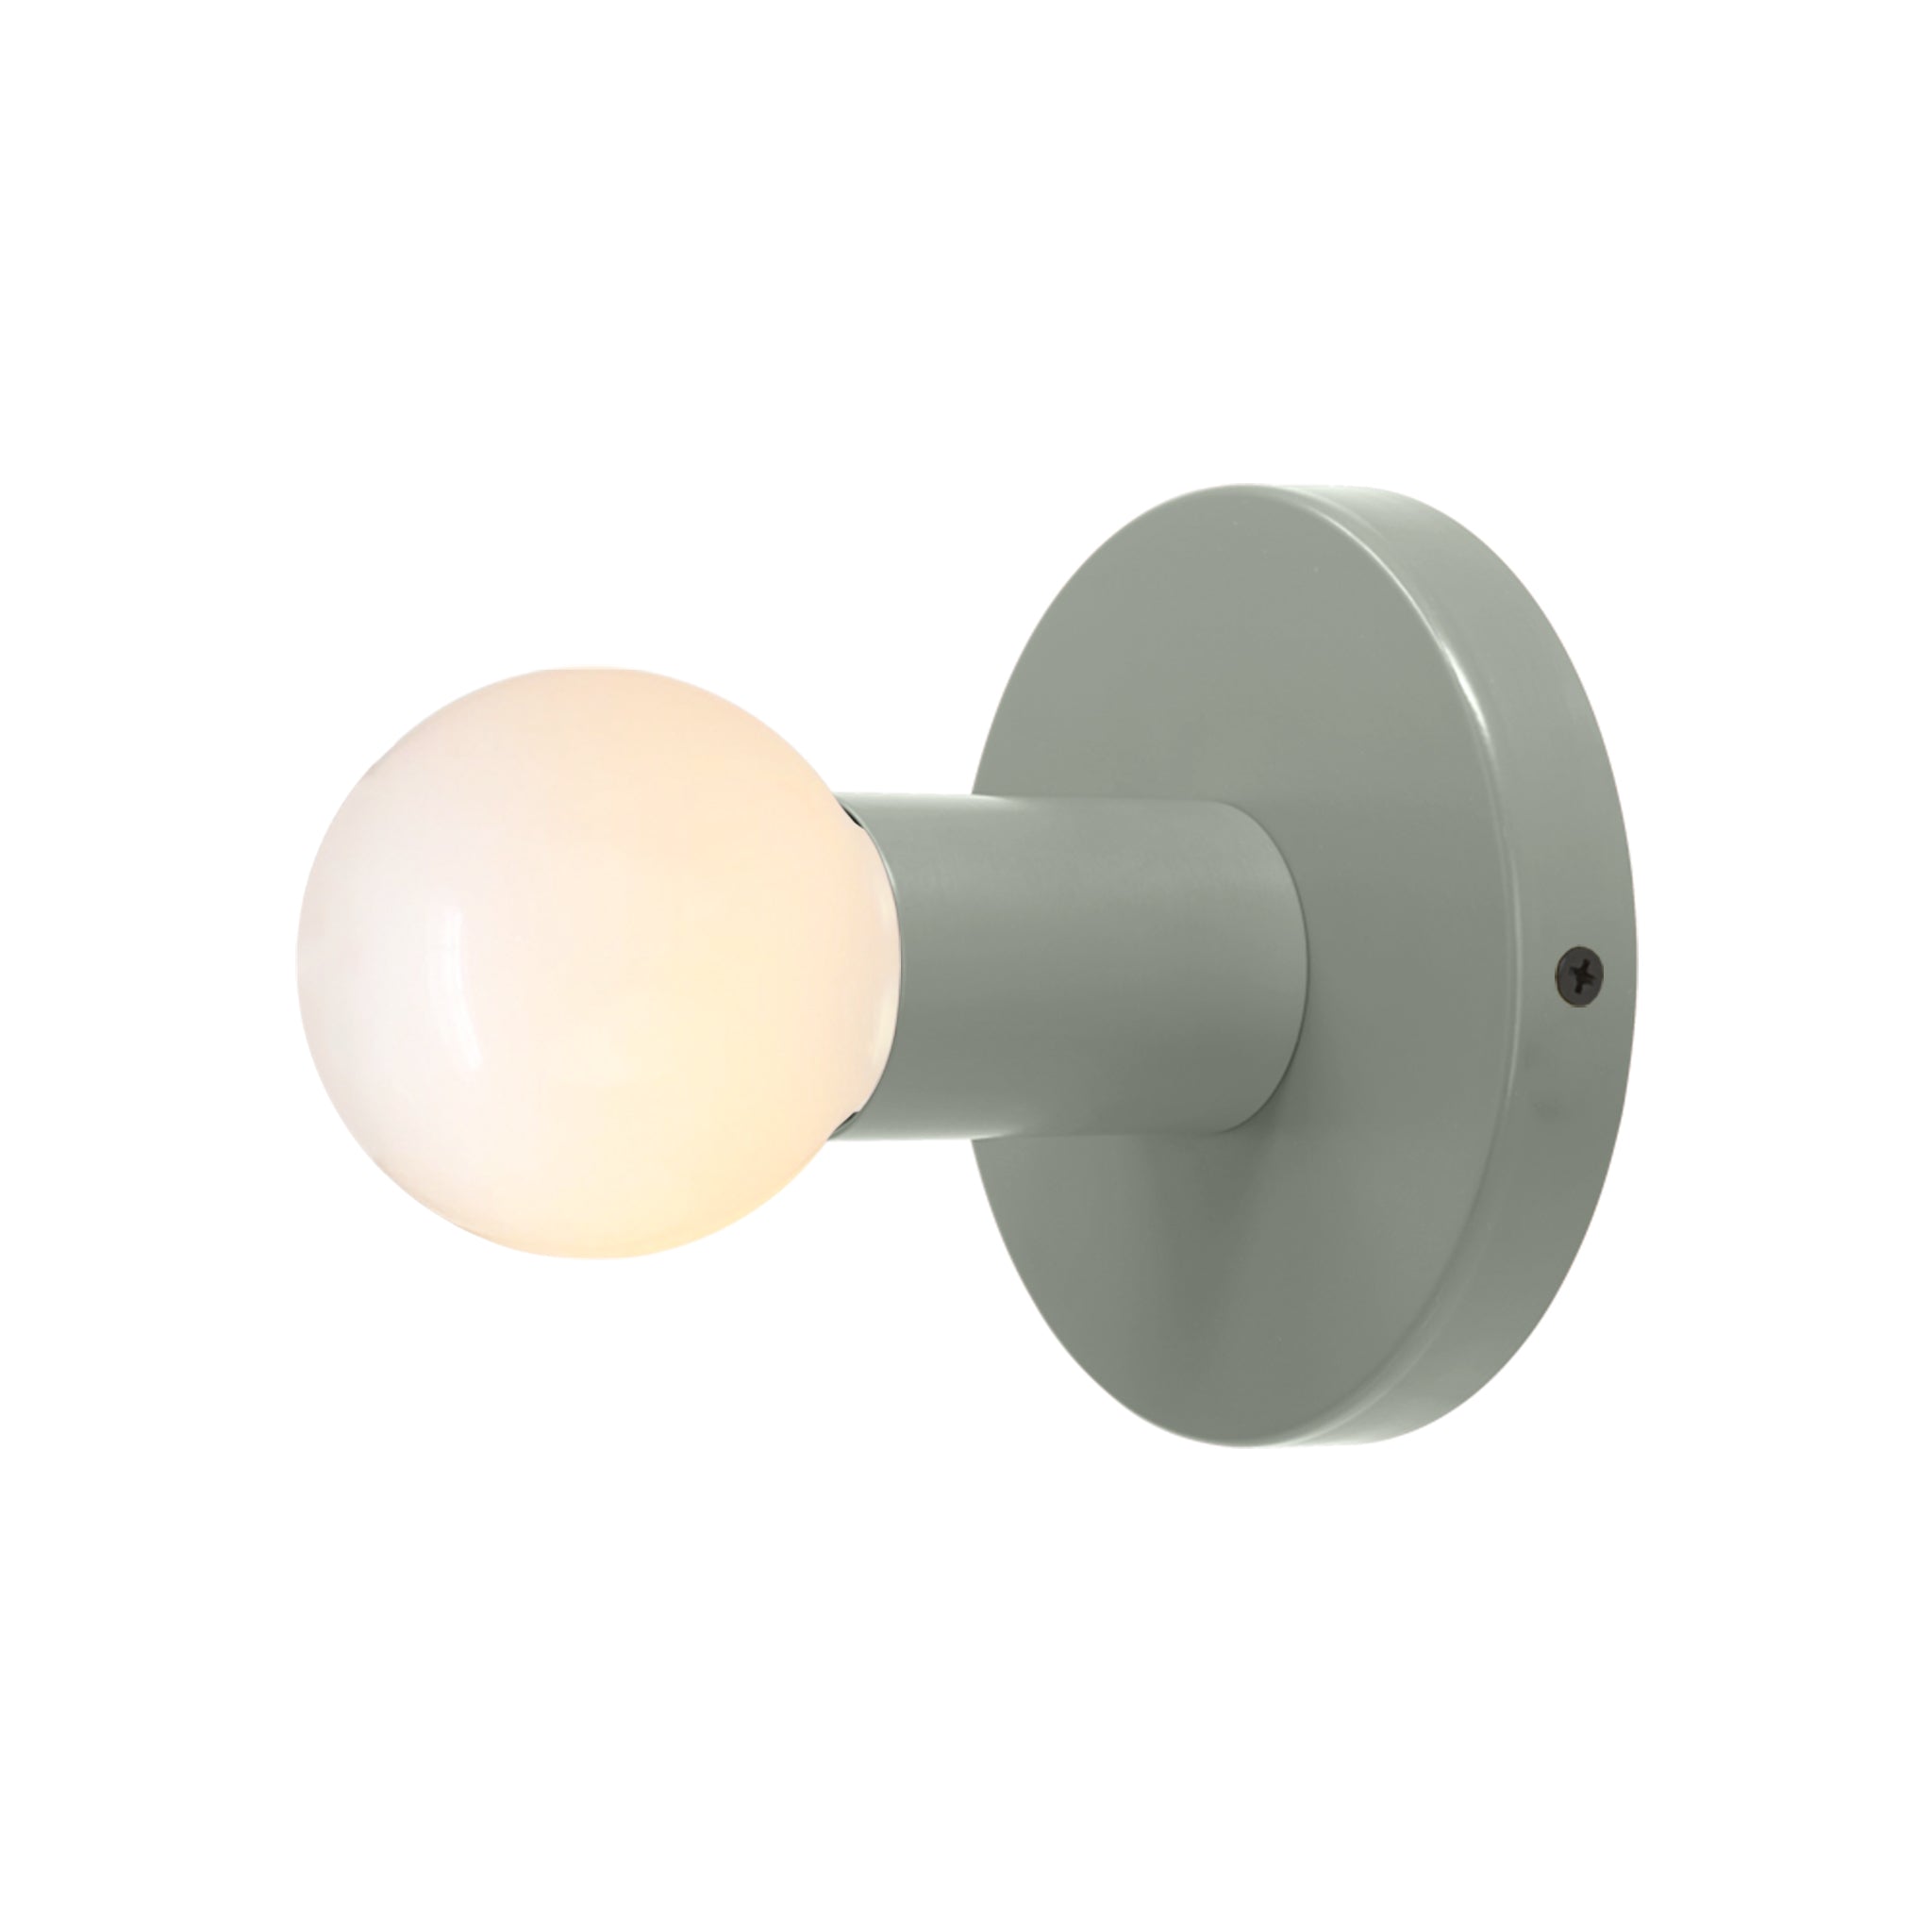 Black and spa color Twink sconce Dutton Brown lighting